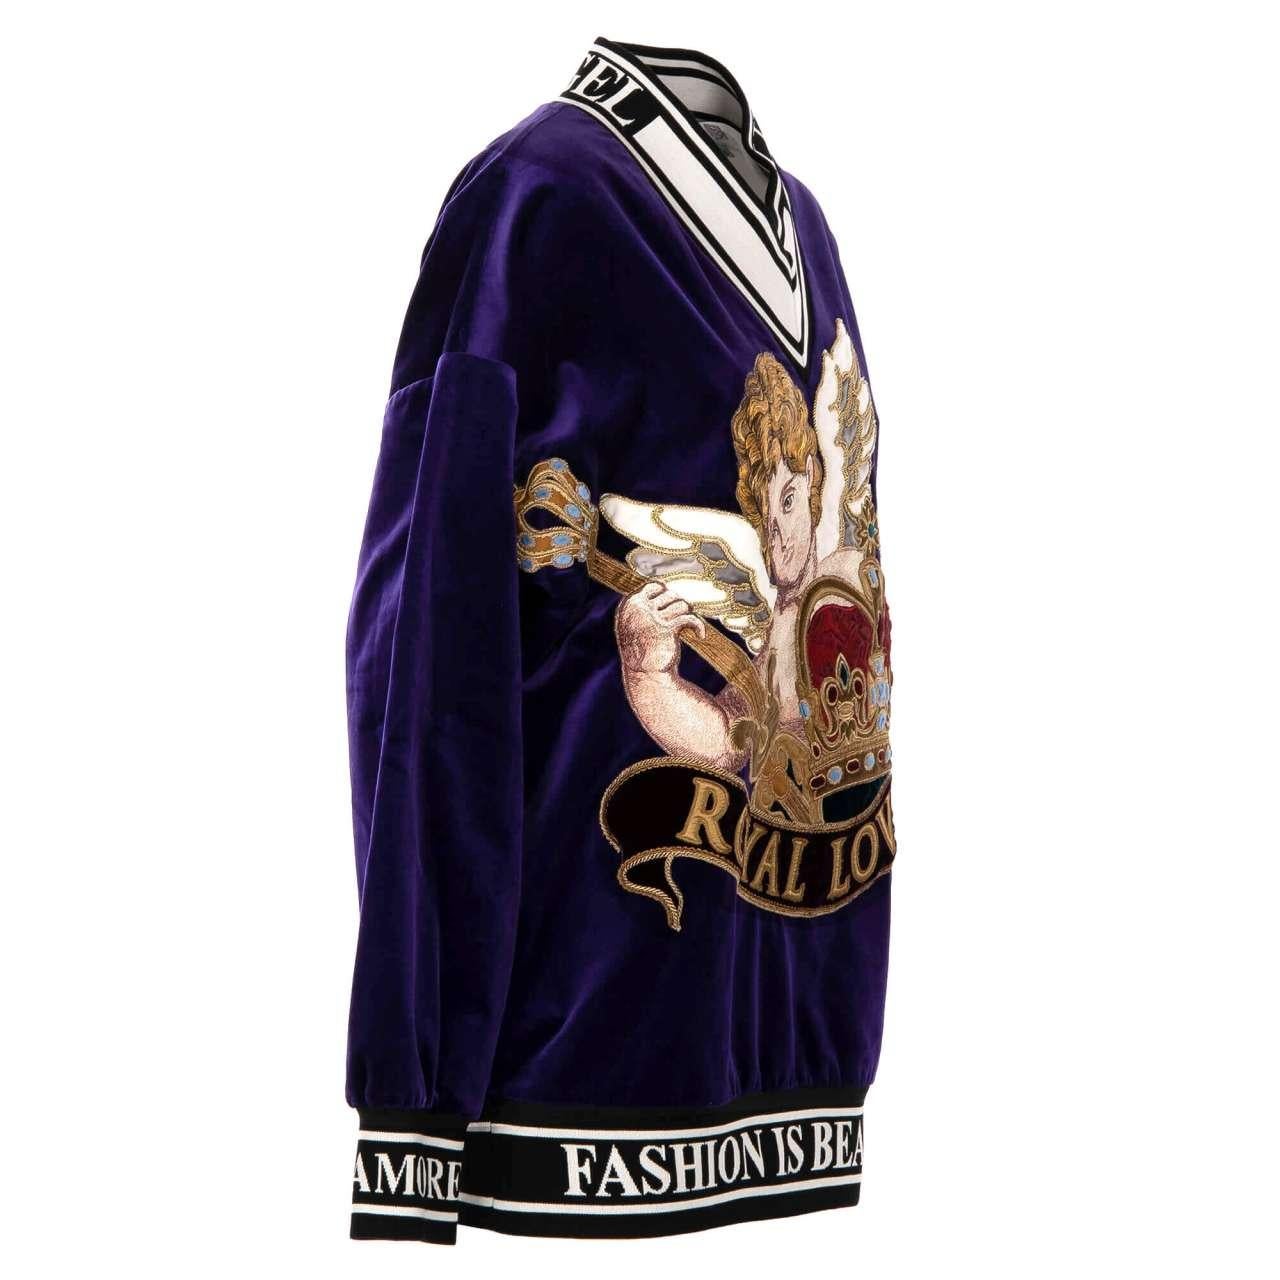 - Oversize long velvet Sweater / Sweatshirt ROYAL LOVE with Angel and Crown embroidery by DOLCE & GABBANA - RUNWAY - Dolce & Gabbana Fashion Show - New with Tags - Former RRP: EUR 1.250 - MADE IN ITALY - Oversize, long cut - Model: